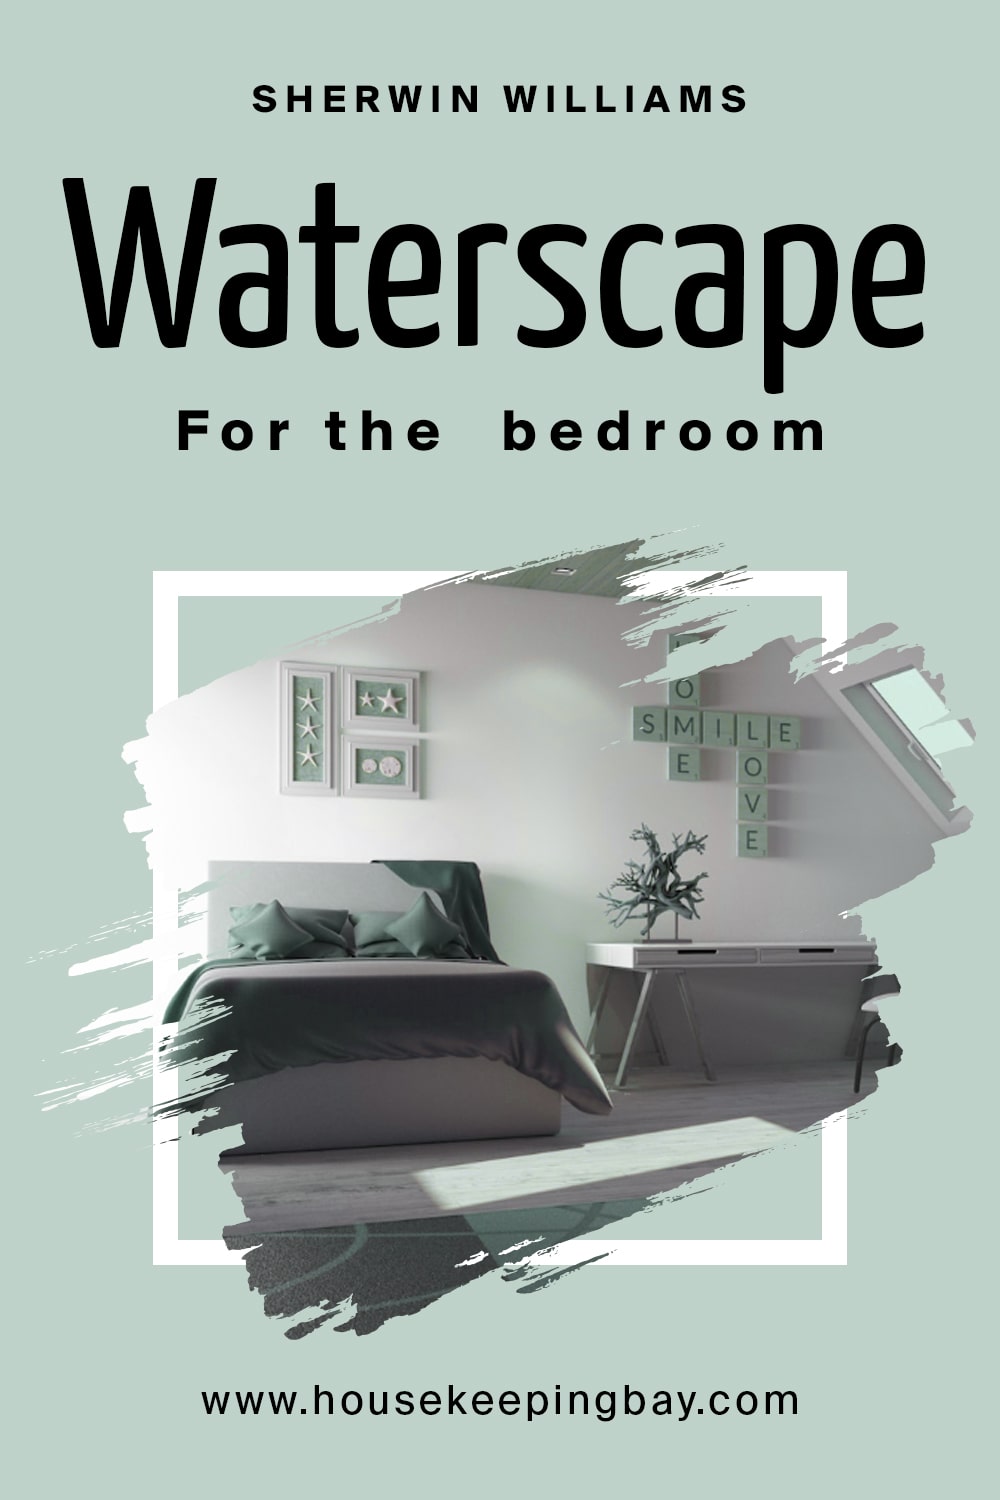 Sherwin Williams. Waterscape For the bedroom